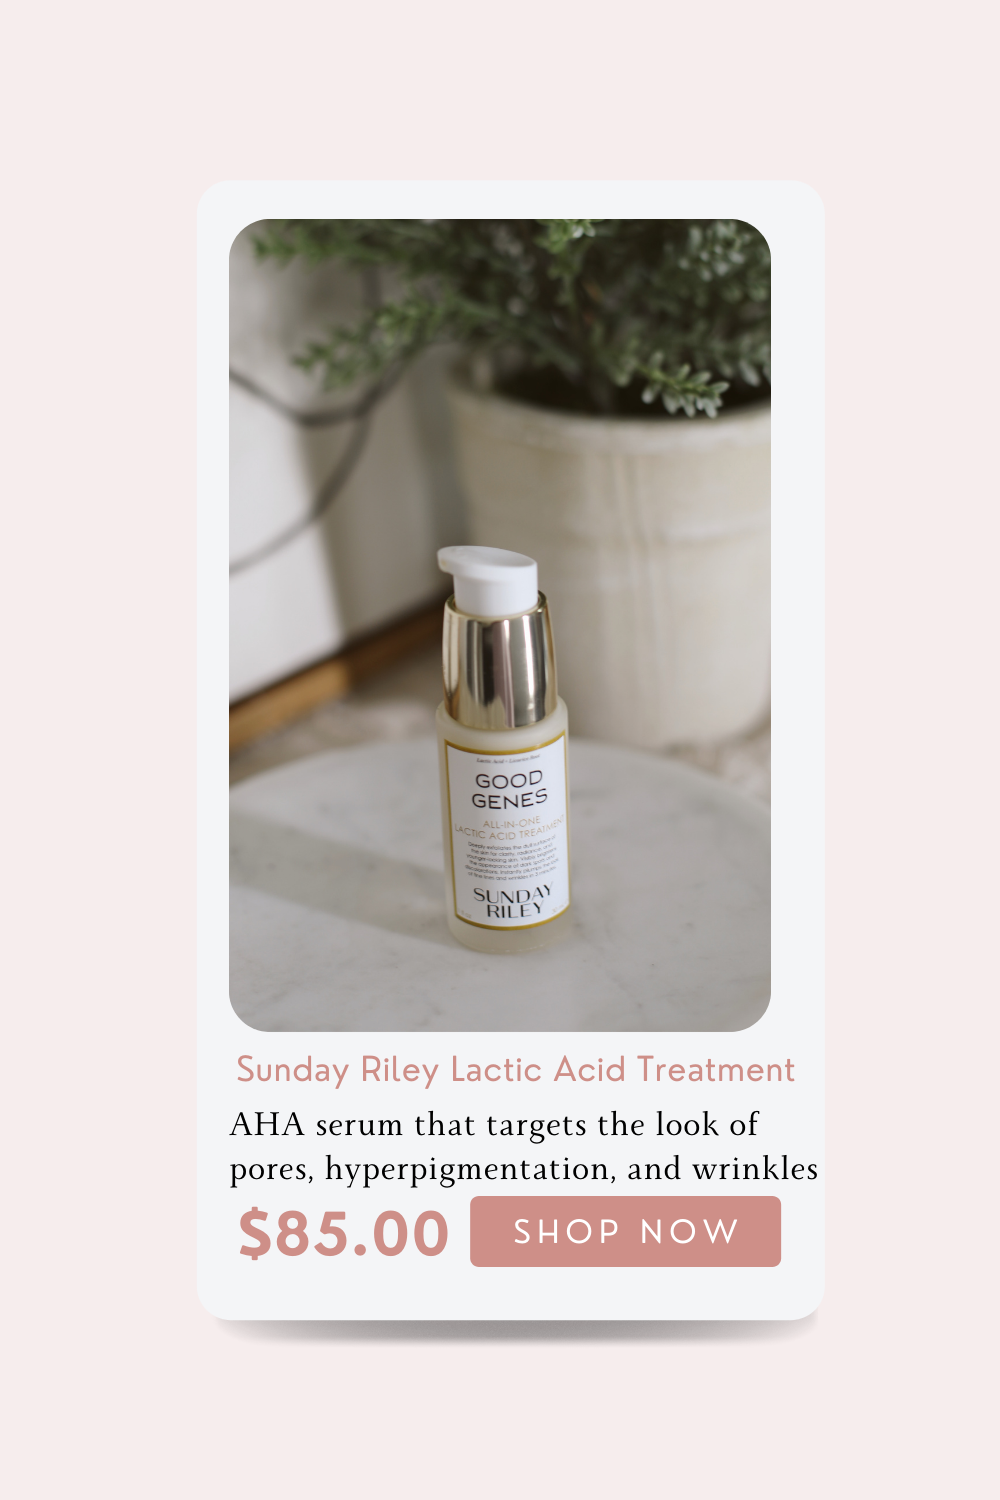 Sunday Riley Good Genes All-In-One AHA Lactic Acid Treatment Review - Affordable by Amanda shares the best skin care routine for oily skin